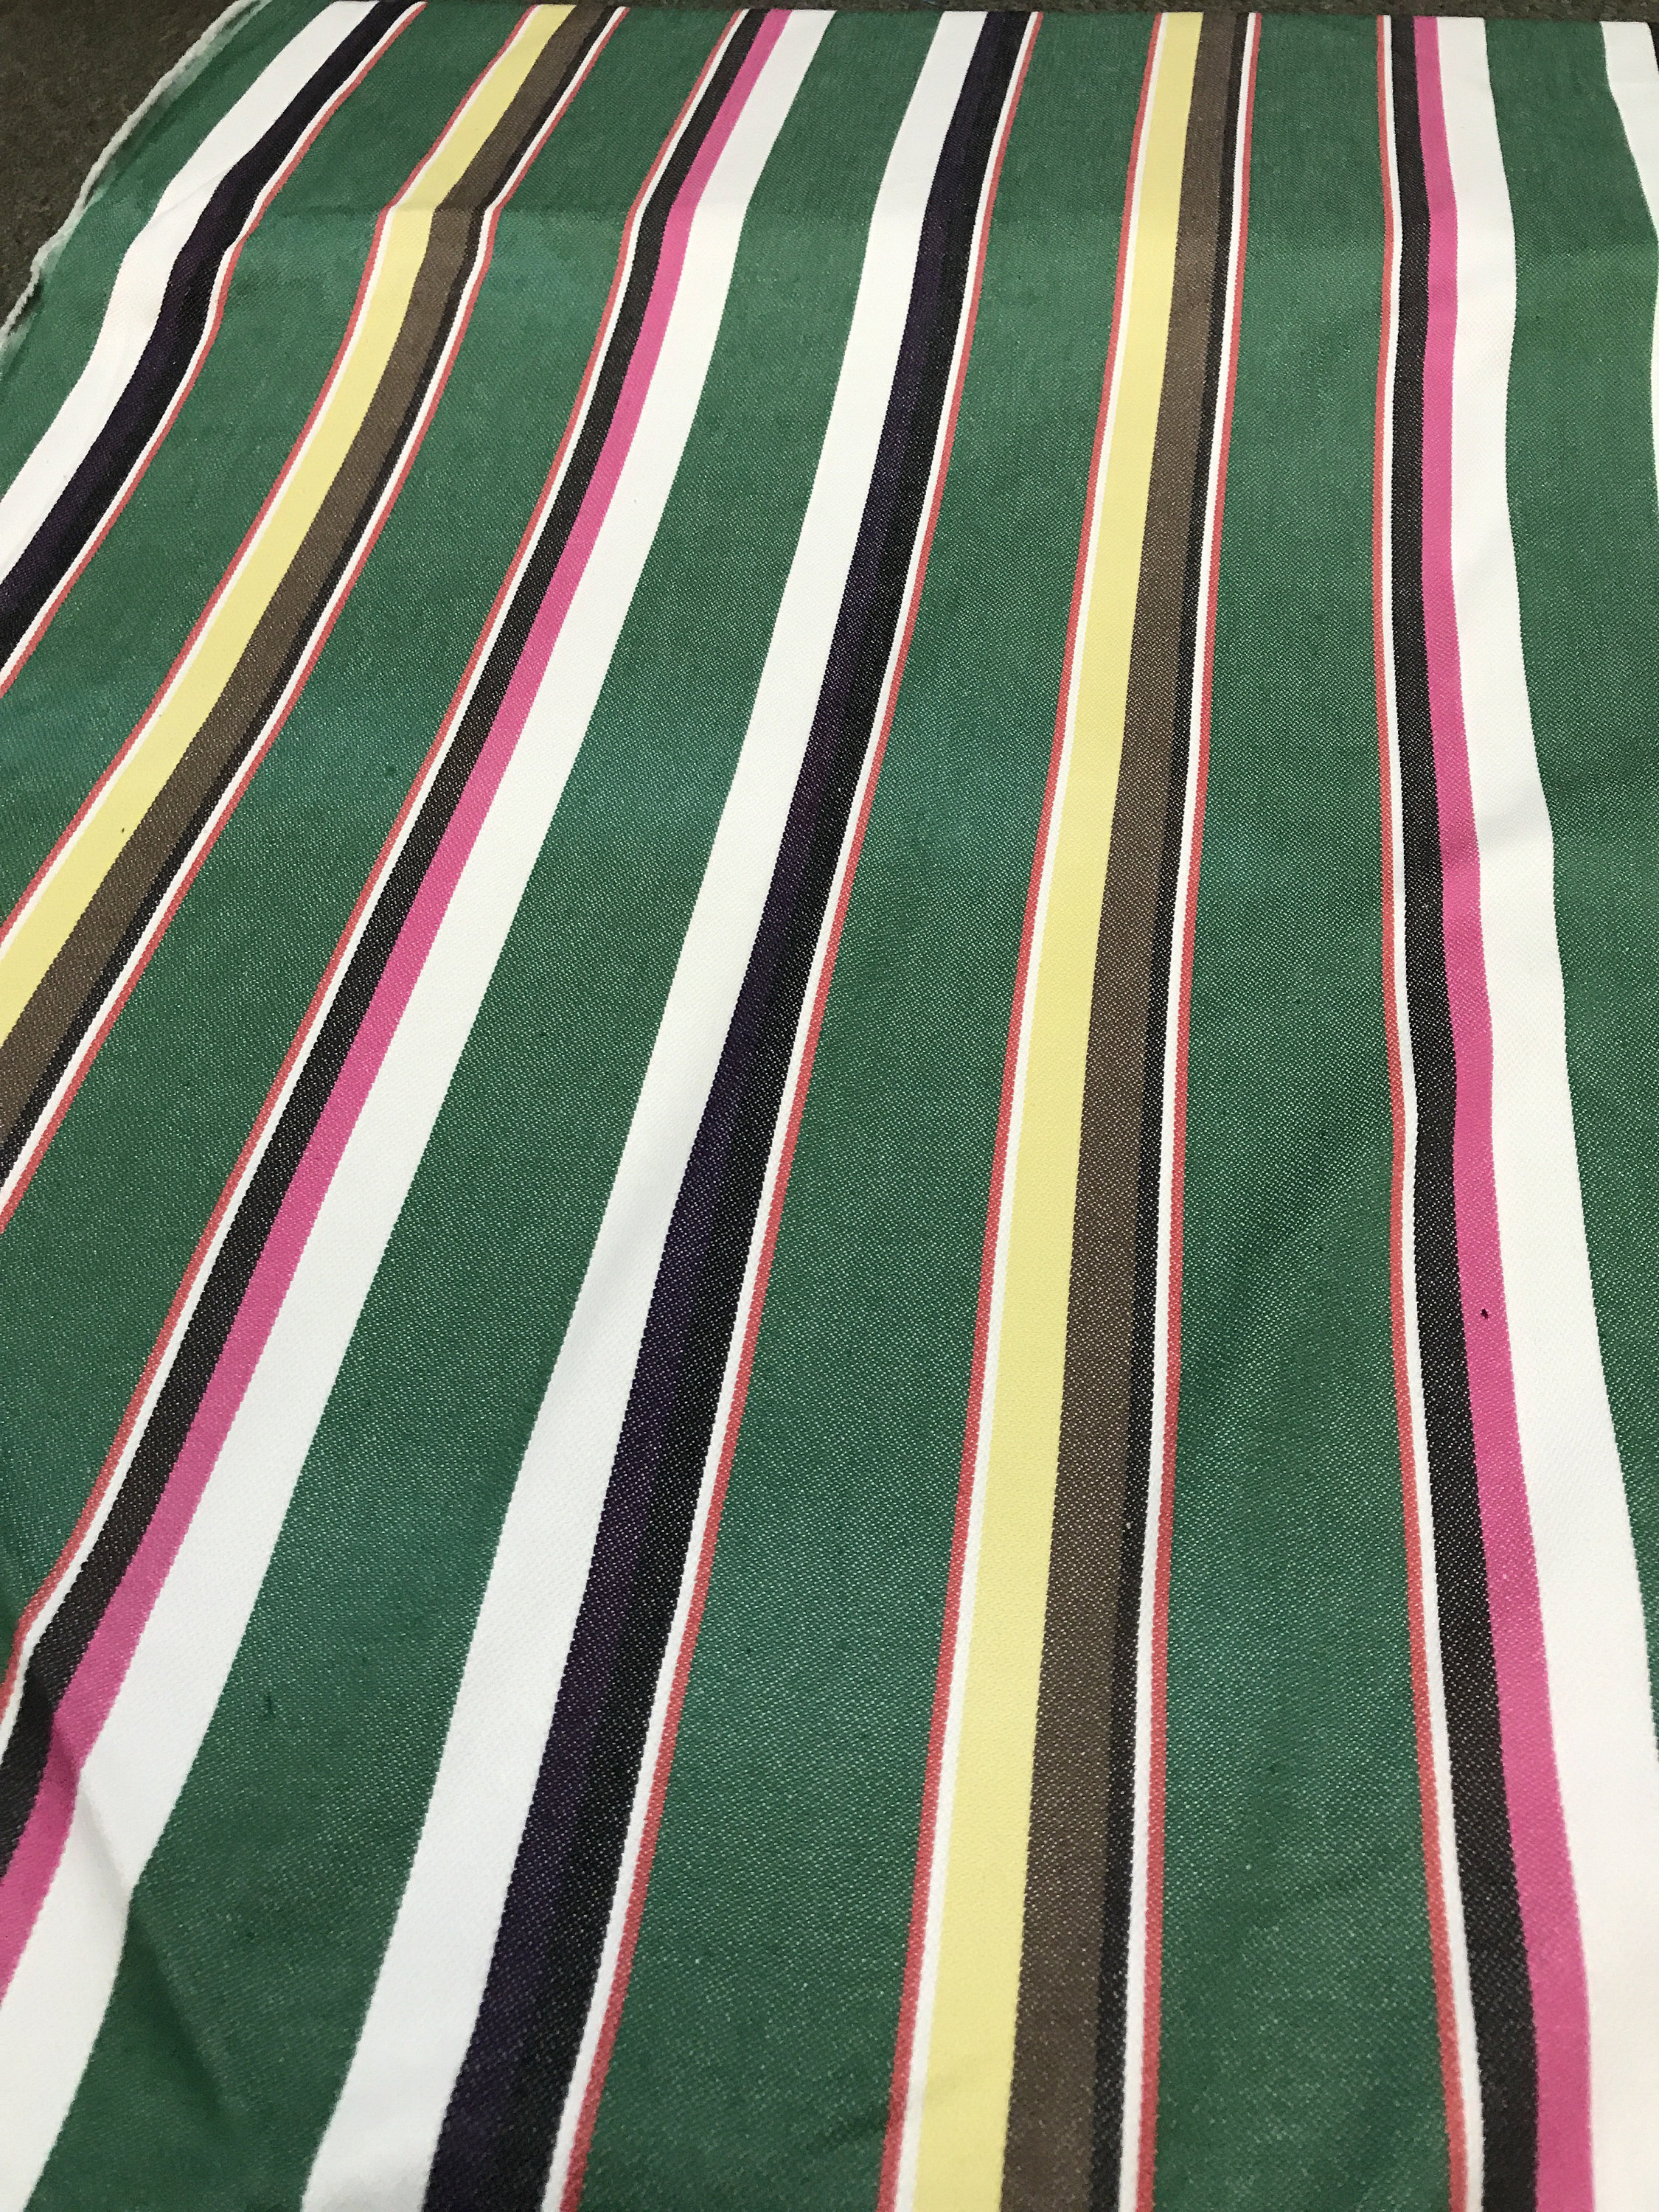 Serape Green Stripe fabric by the yard great for beach mat | Etsy